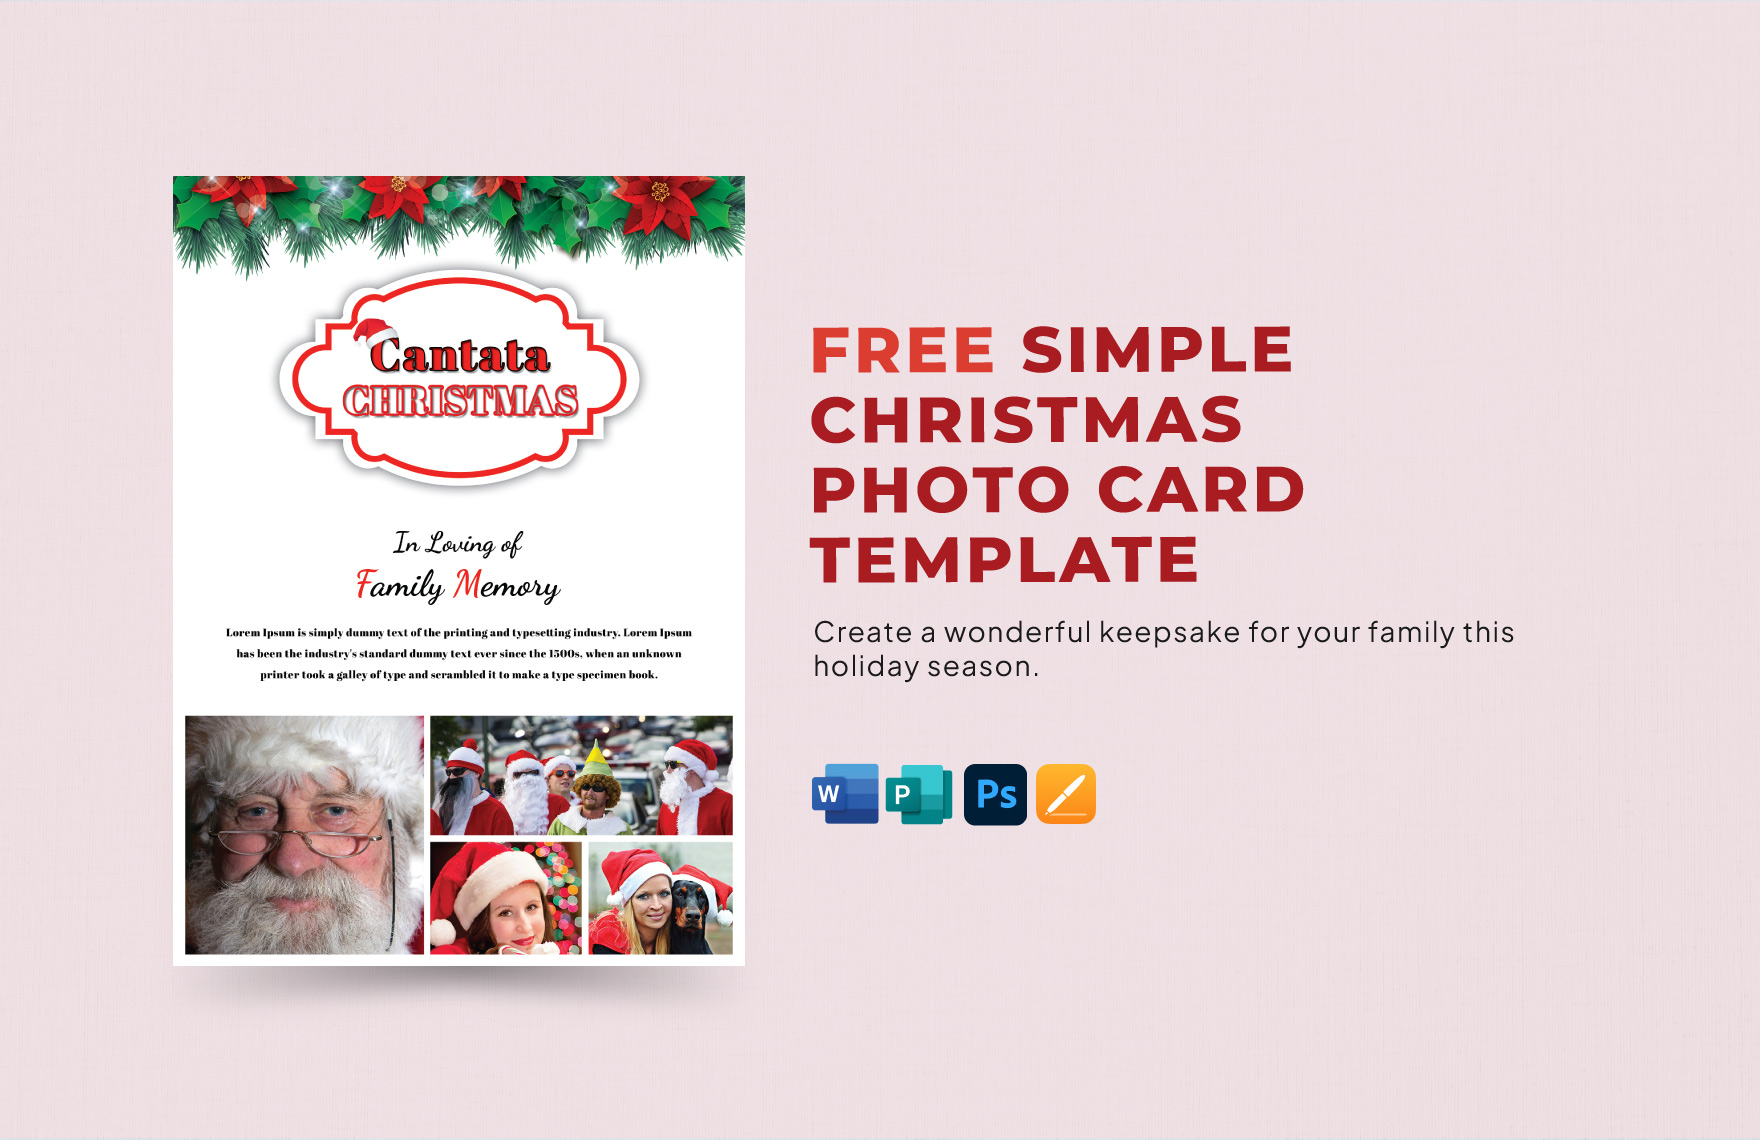 Free Simple Christmas Photo Card Template